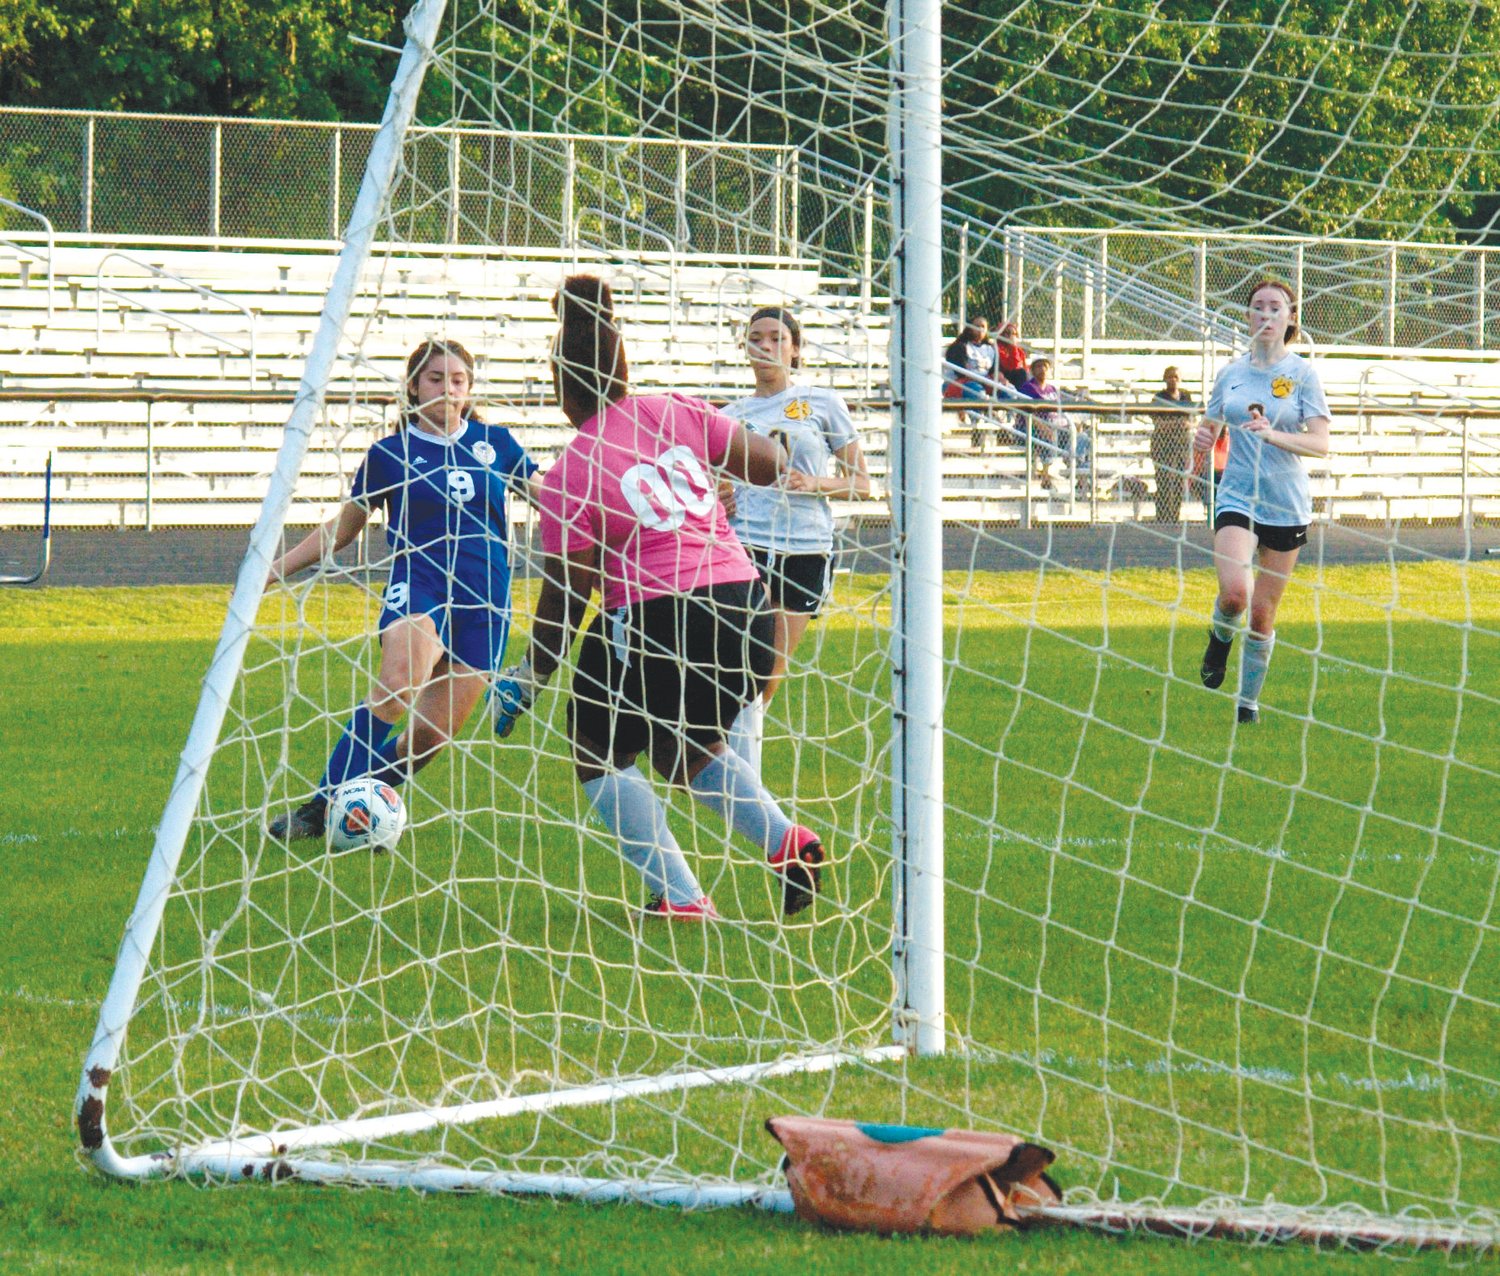 Jordan-Matthews sophomore Iris Sibrian Zetino (9) dribbles around the James Kenan goalkeeper in the Jets' 9-0 blowout win over the Tigers on Monday. Sibrian Zetino scored 2 goals in the victory, good for the game's second-highest scorer.